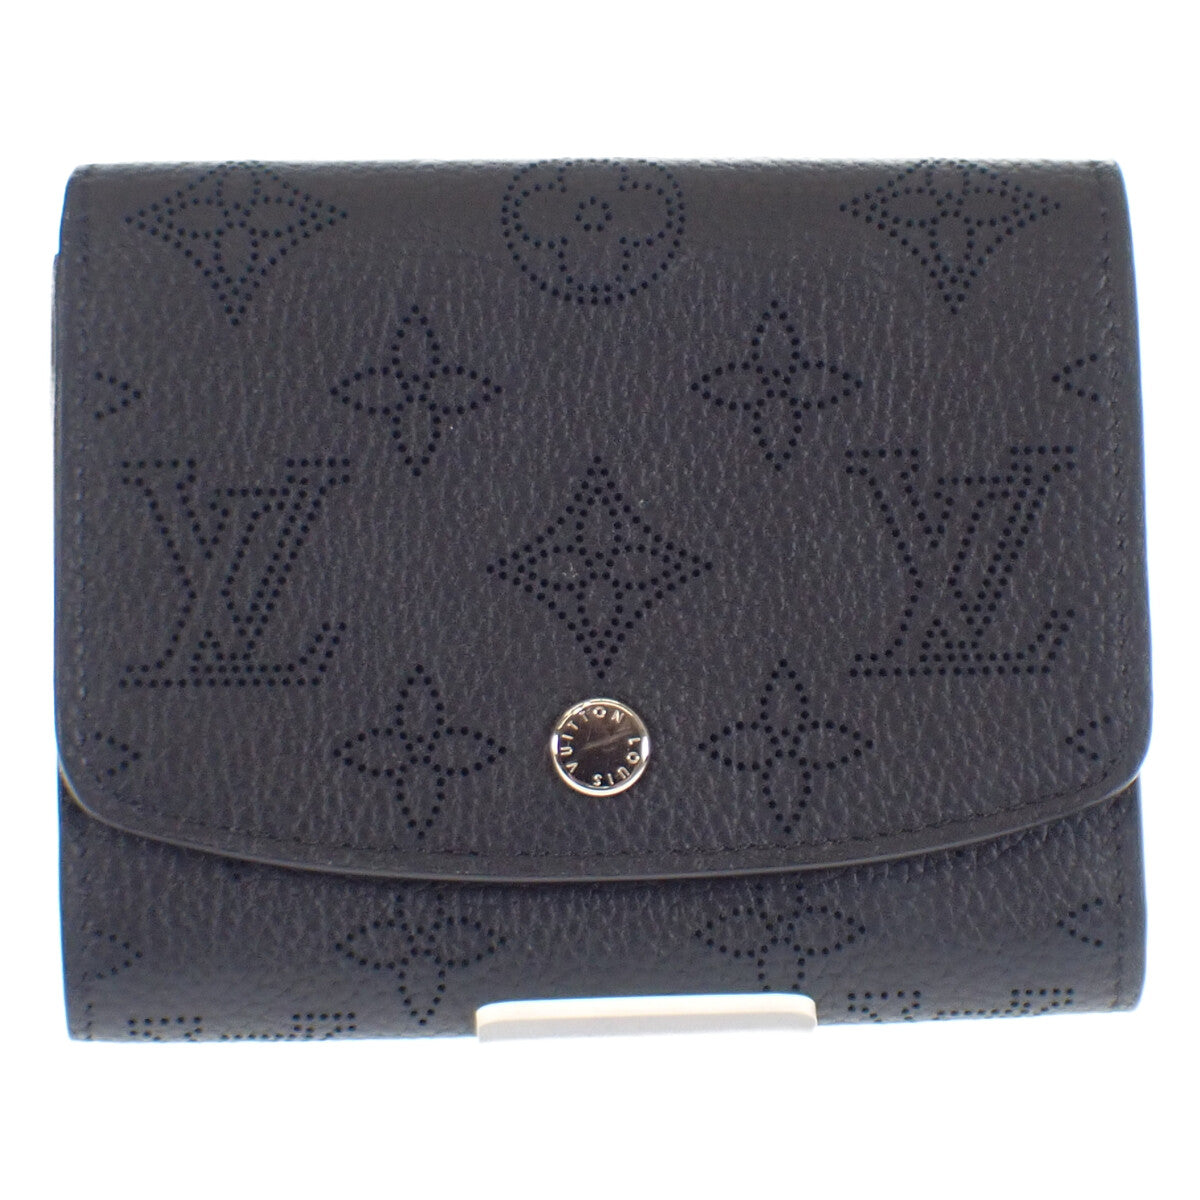 Louis Vuitton Iris Compact Wallet Leather M62540 in Excellent condition